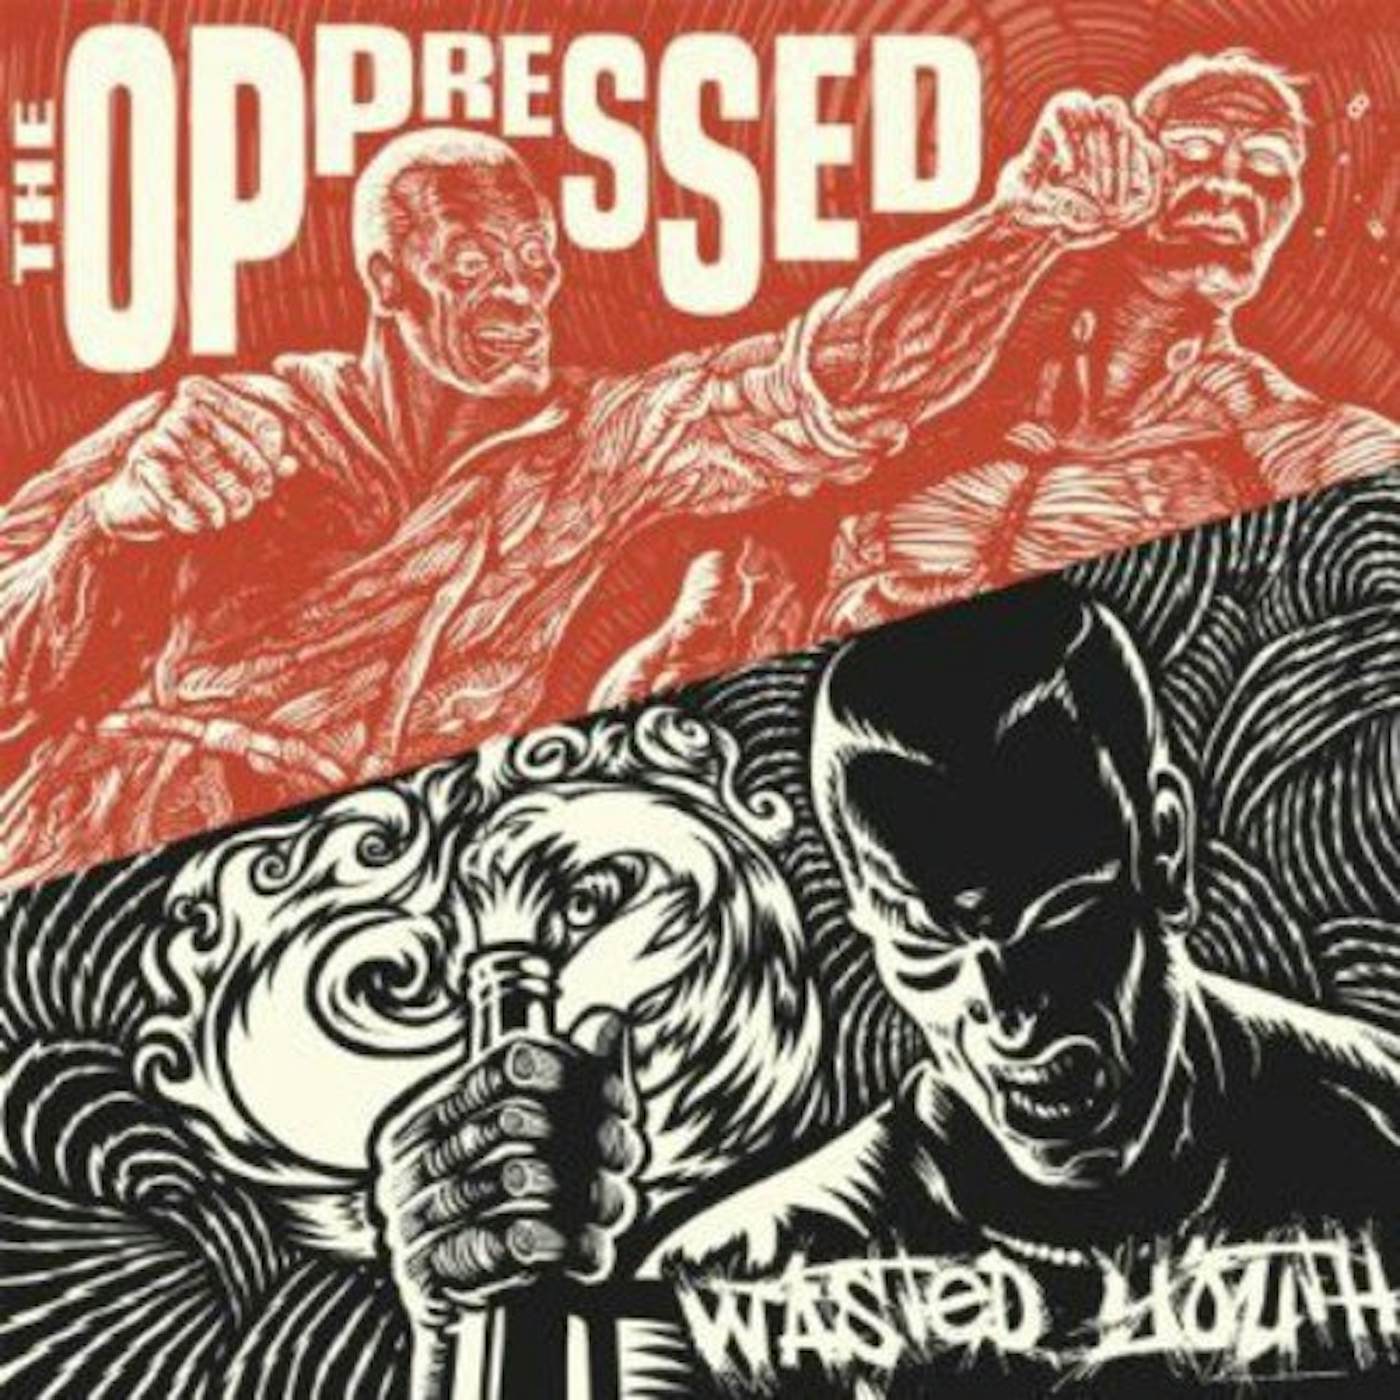 Oppressed/Wasted You 2 GENERATIONS 1 MESSAGE Vinyl Record